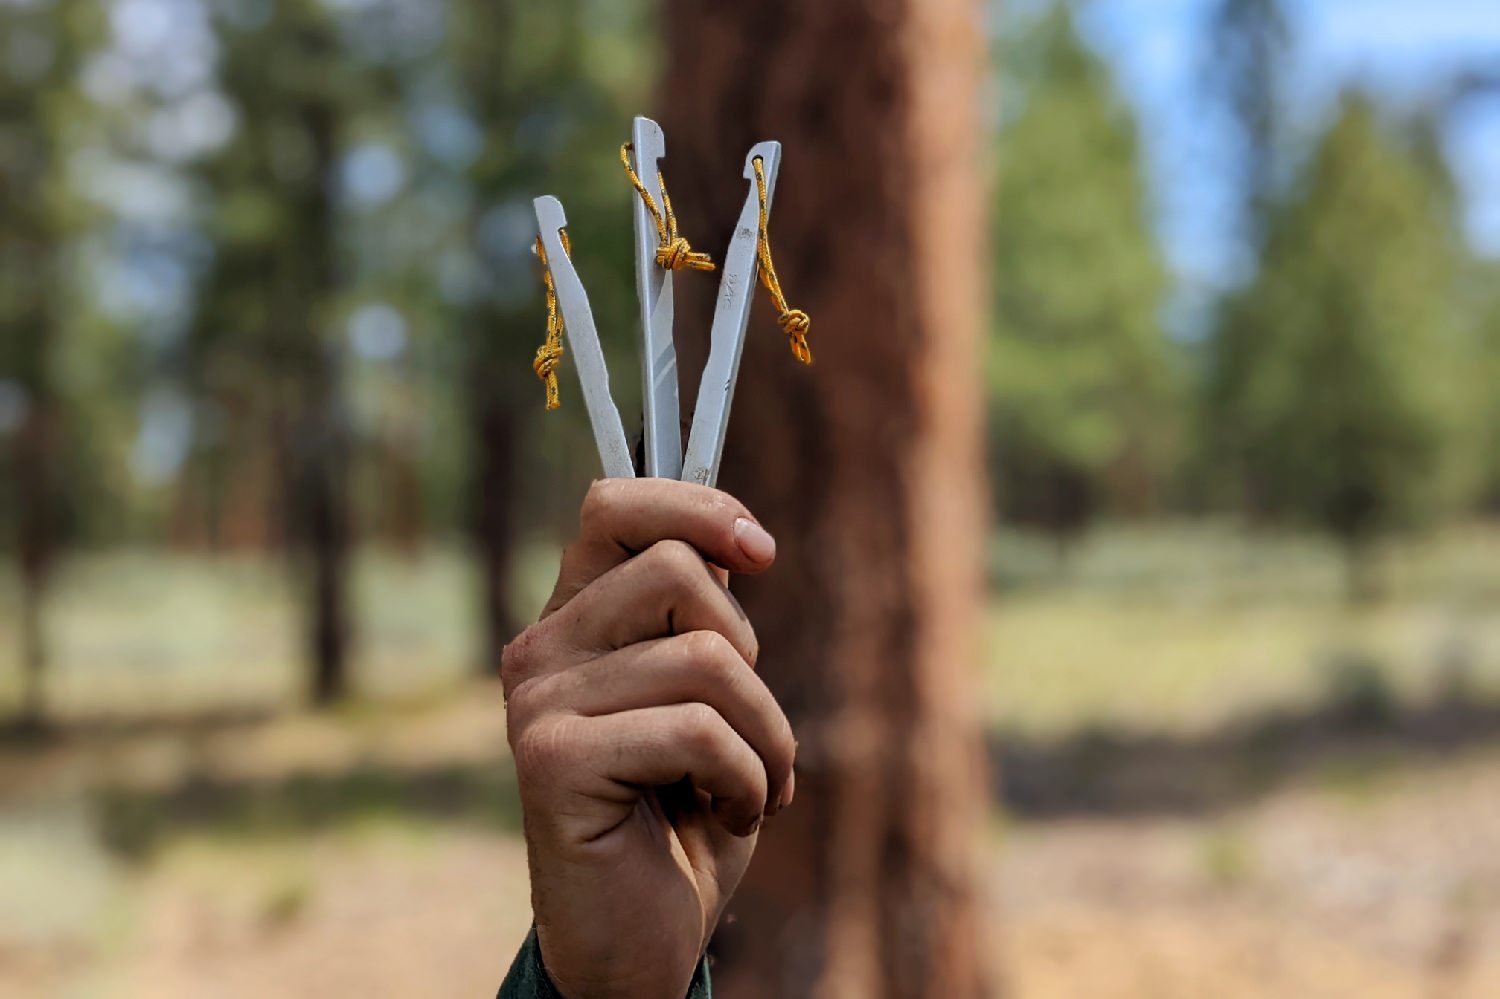 A hand holding up three tent stakes - there is a blurred forest view in the background